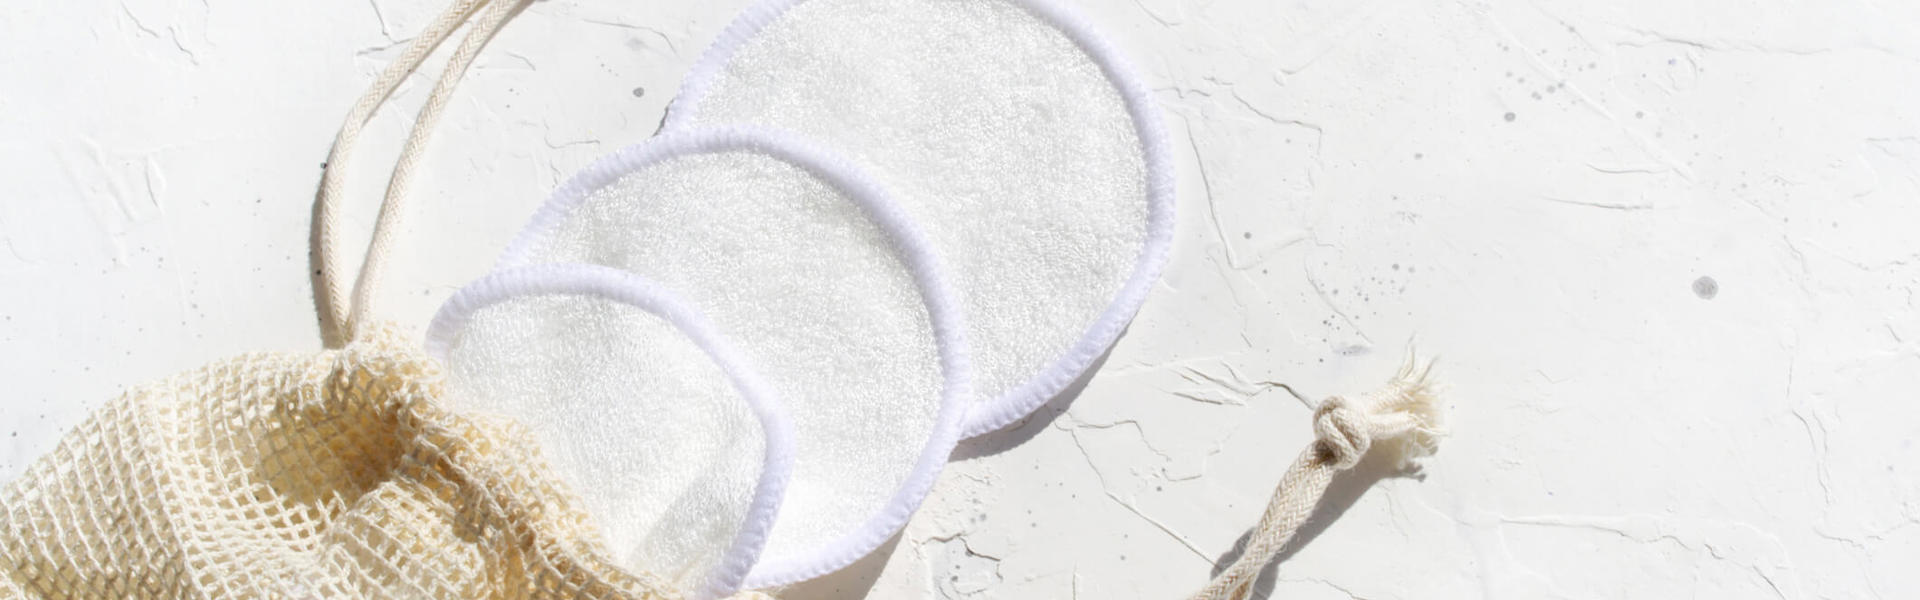 3 cotton reusable make up pads in a net bag